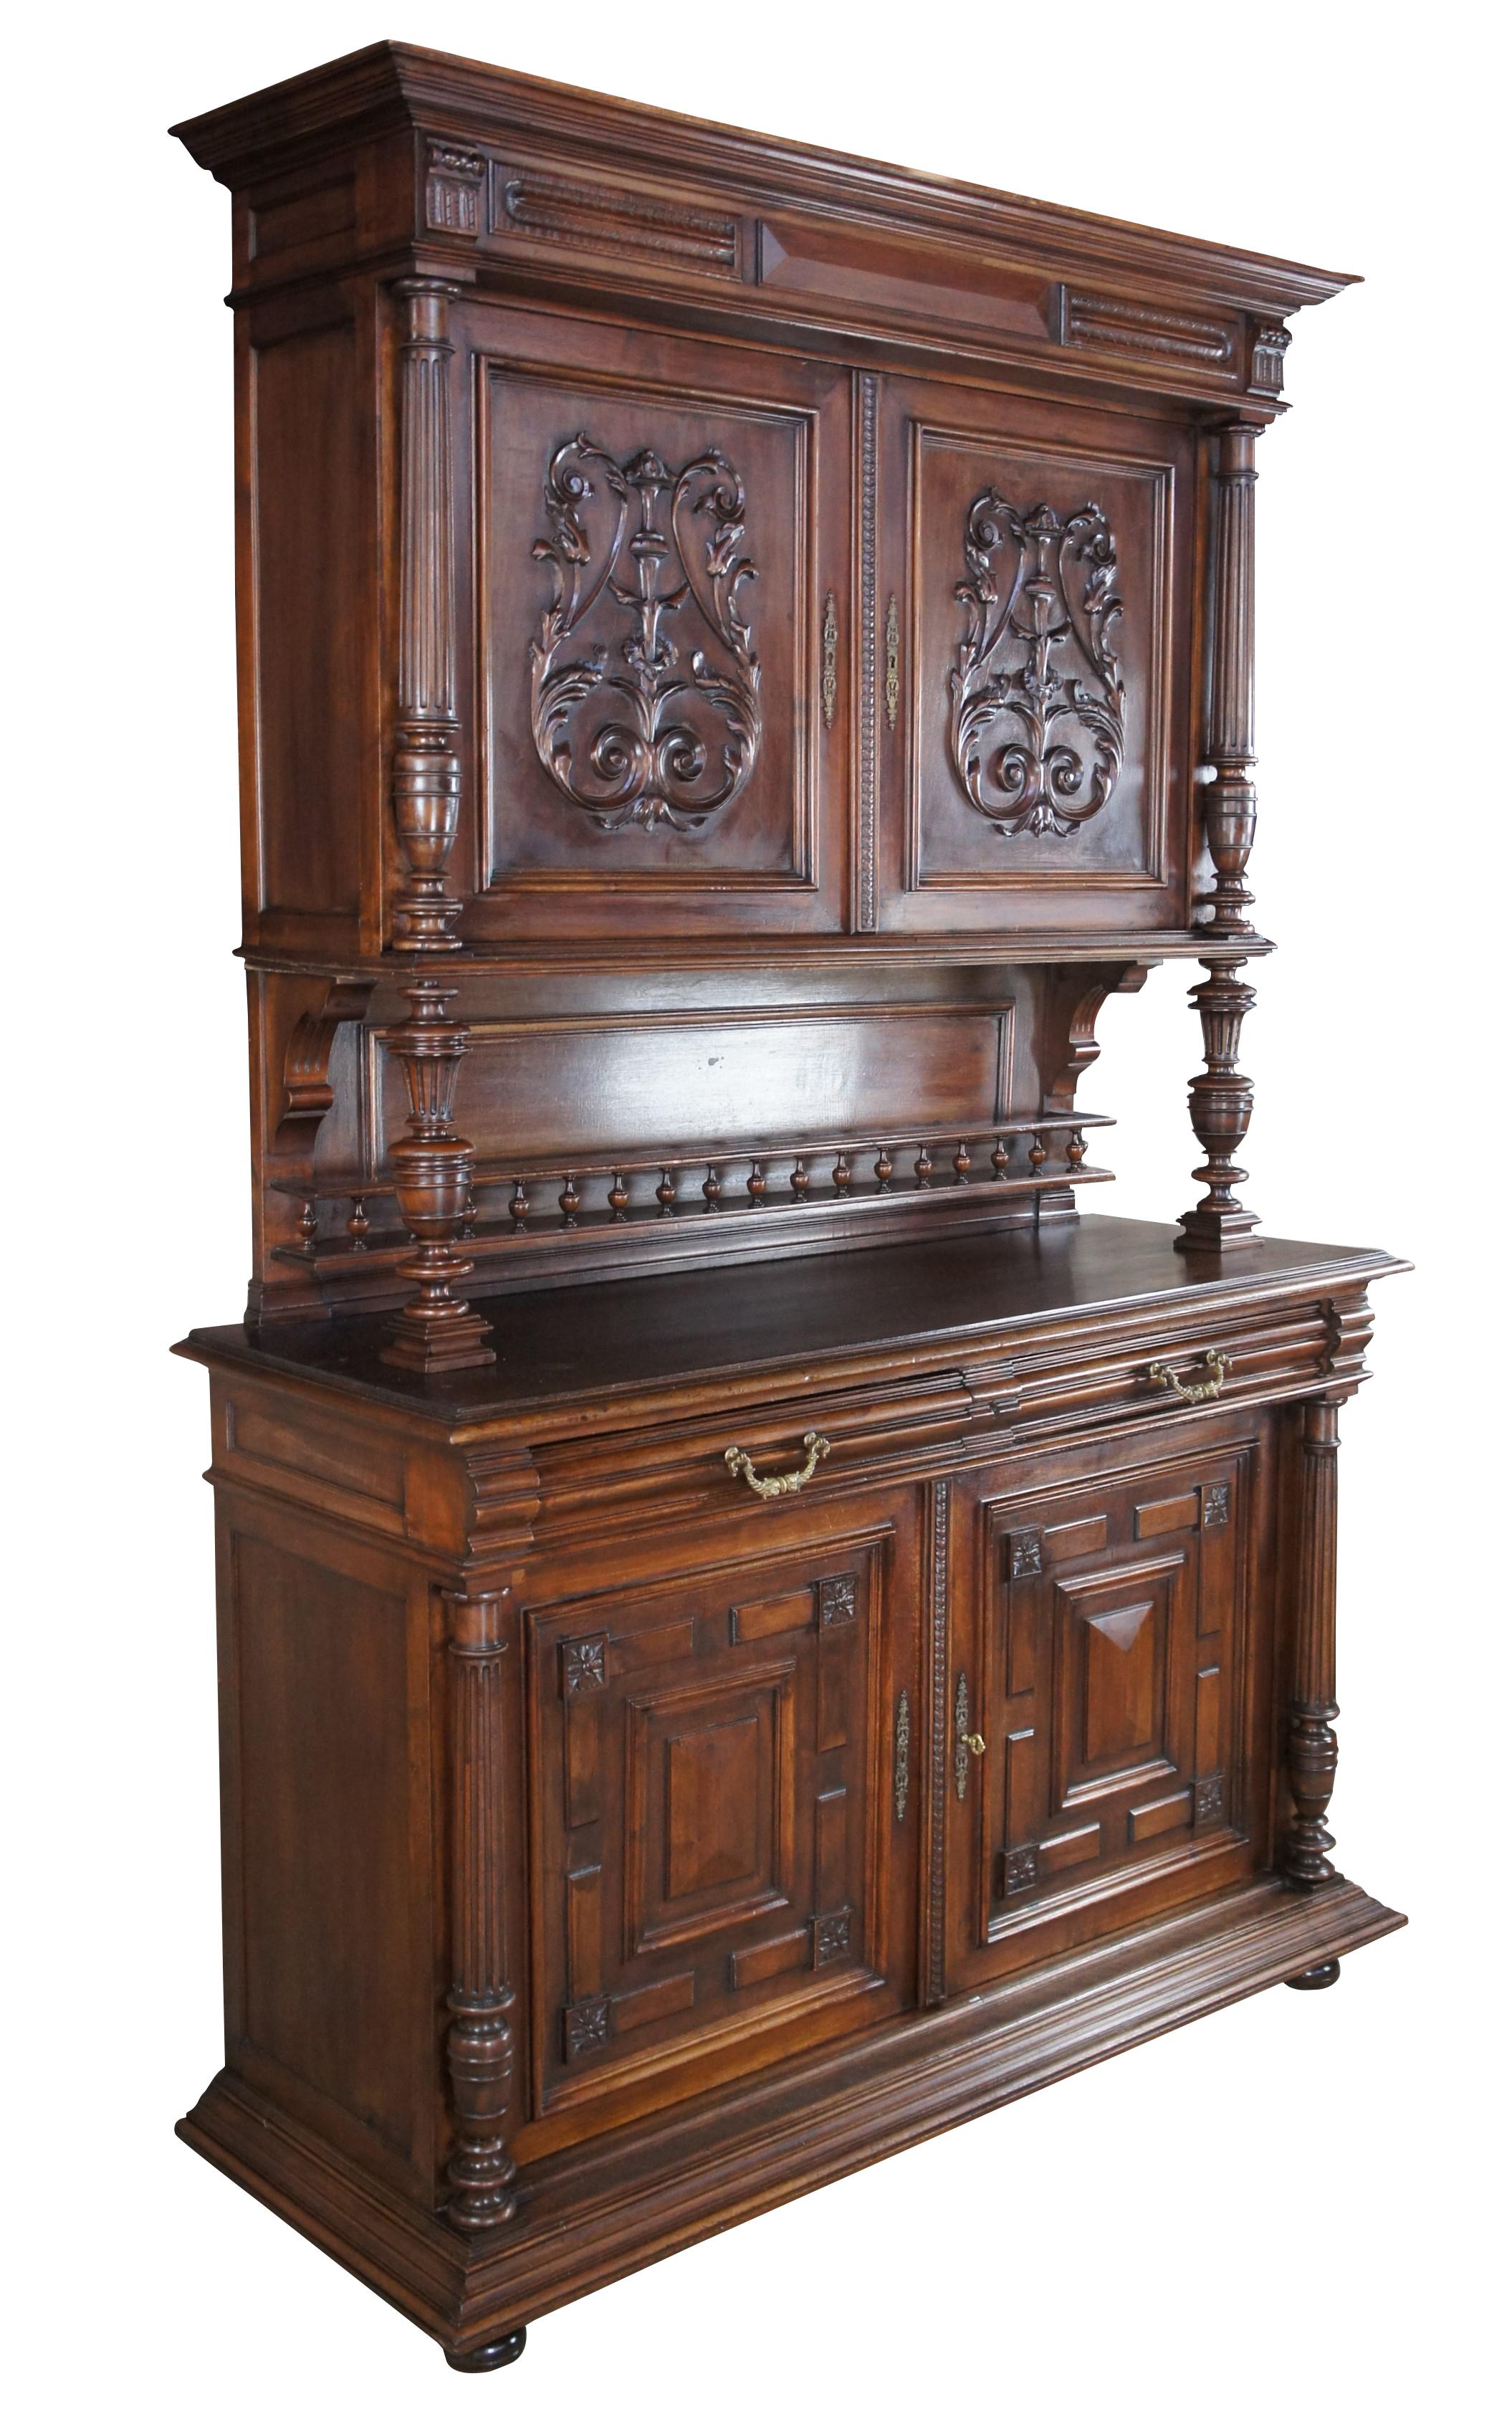 An impressive Renaissance Revival / Henry II style Buffet, bar back or server with hutch. A rectangular form made from walnut with two cabinets for storage, hand dovetailed drawers and a central serving area. Features hand turned fluted columns,